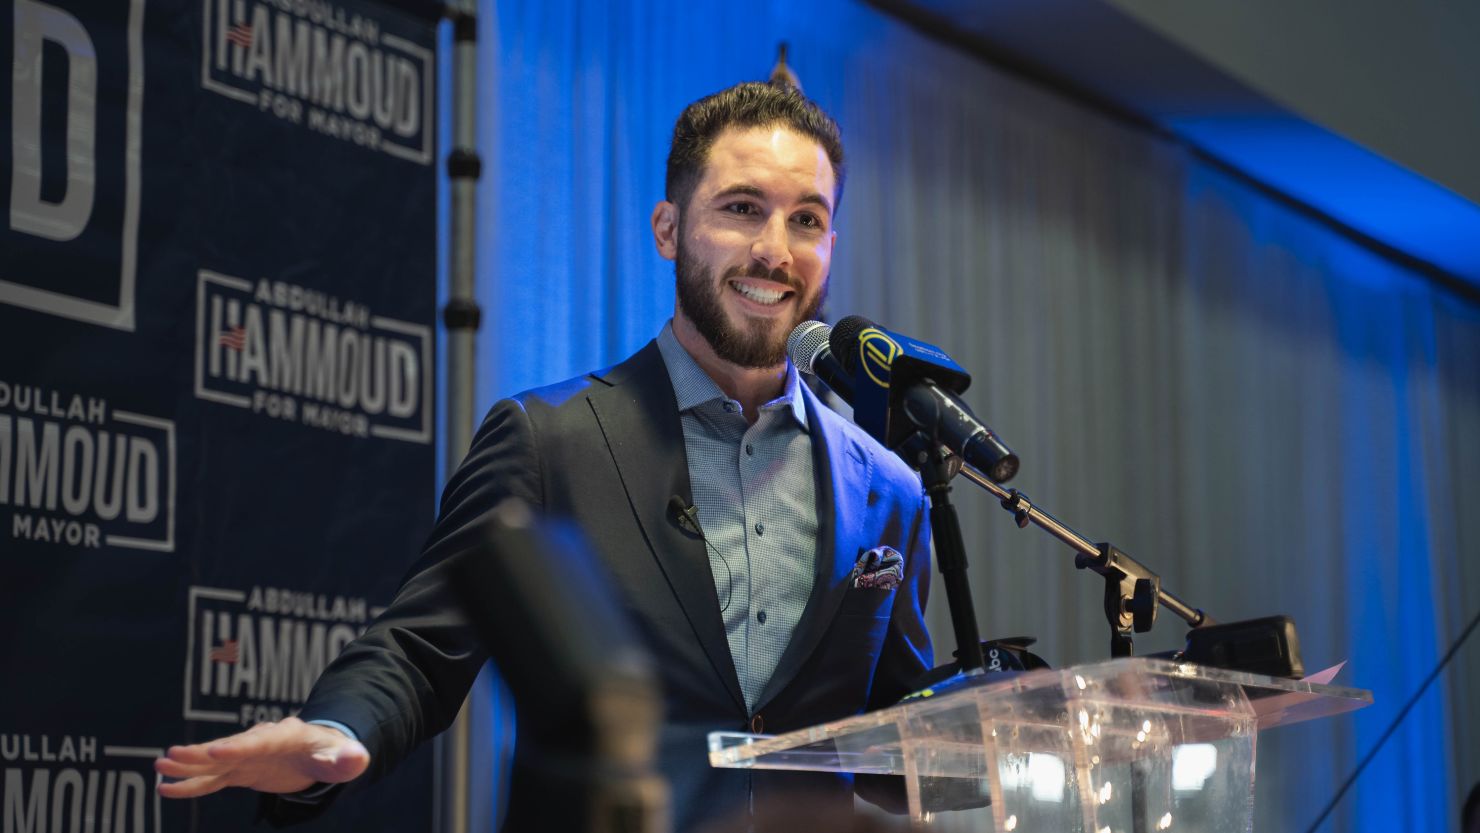 Abdullah Hammoud, the son of Lebanese immigrants, was born and raised in Dearborn, Michigan.